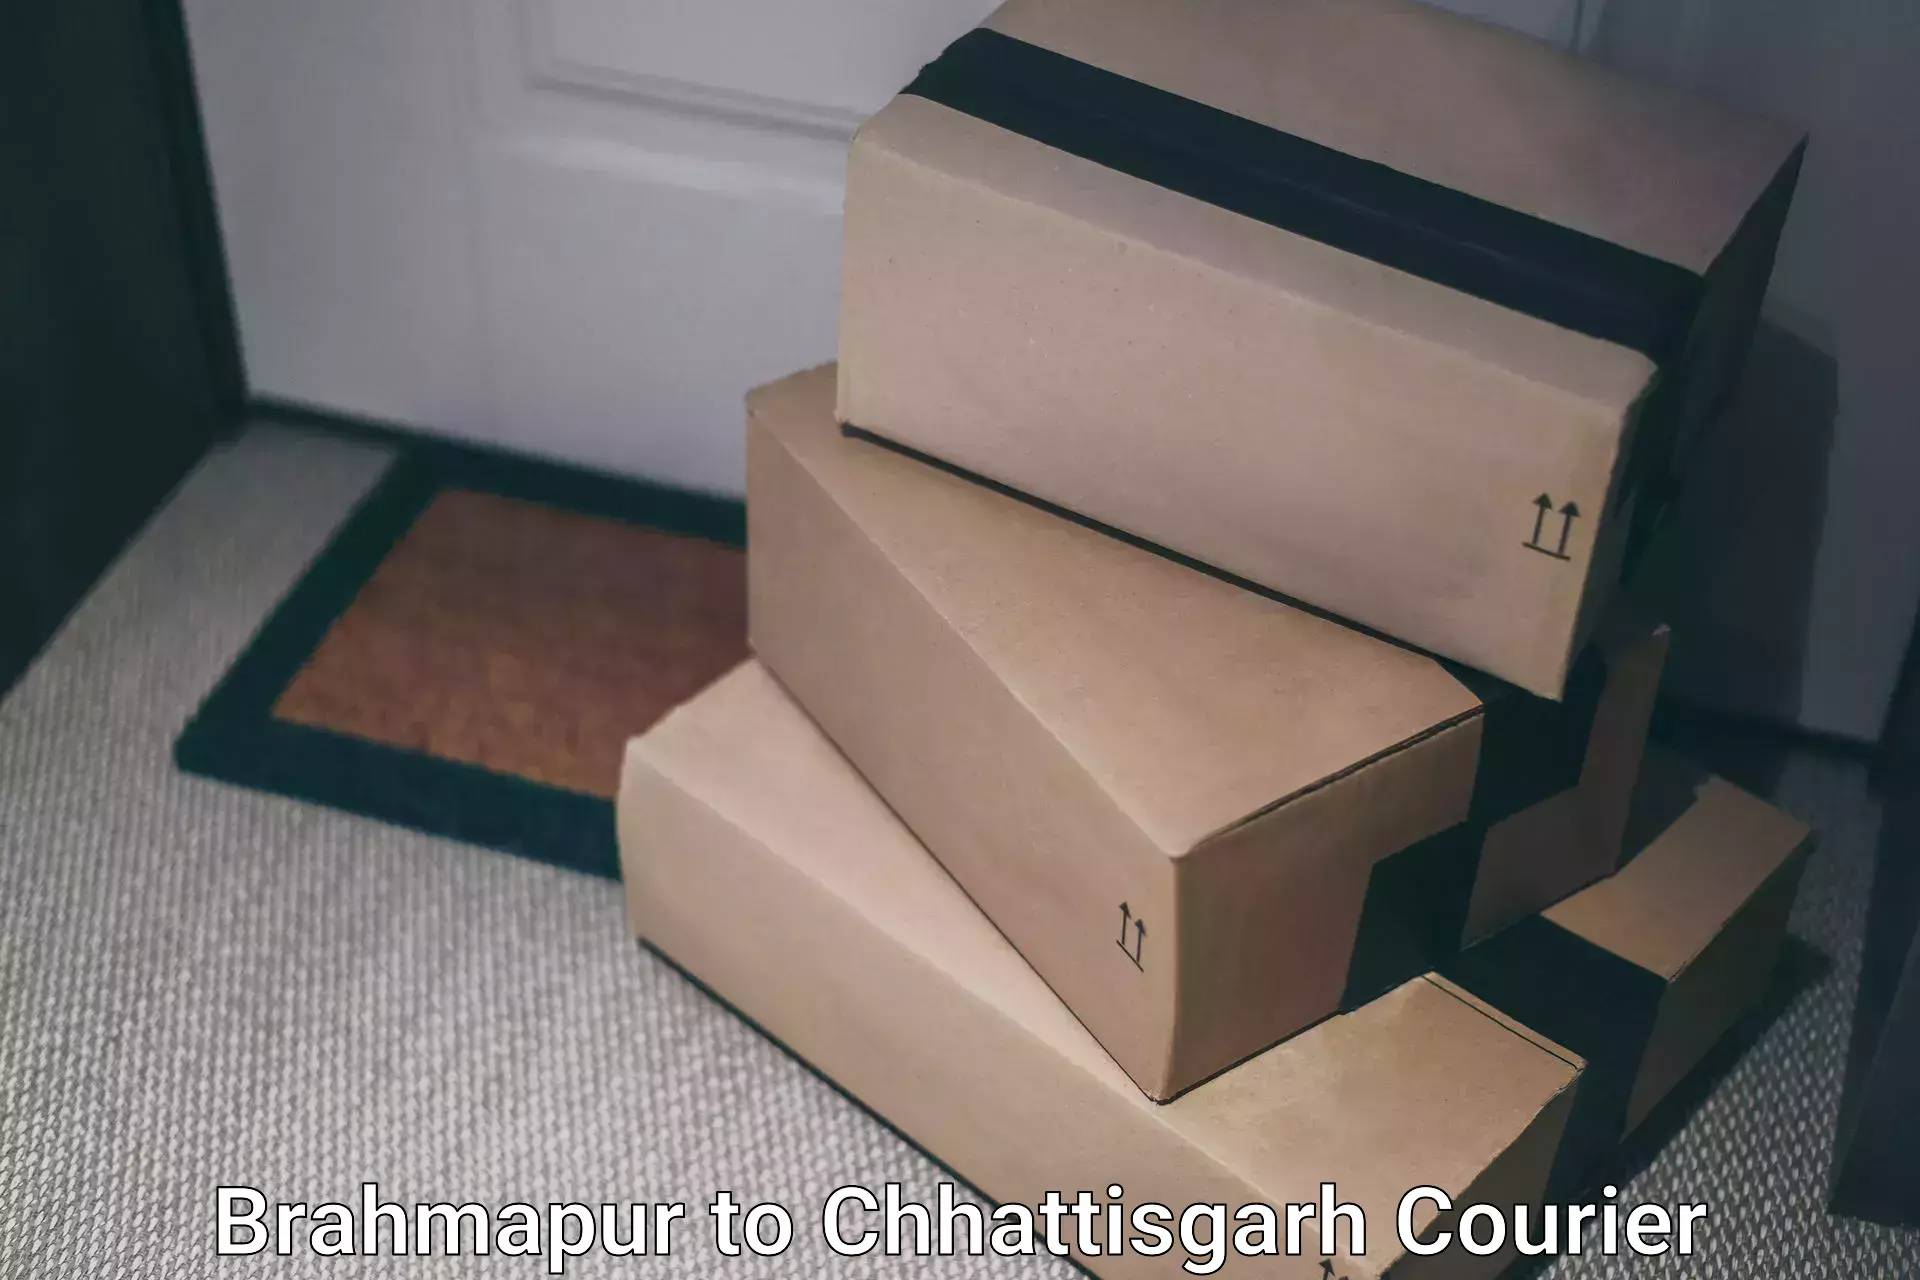 State-of-the-art courier technology Brahmapur to Pathalgaon